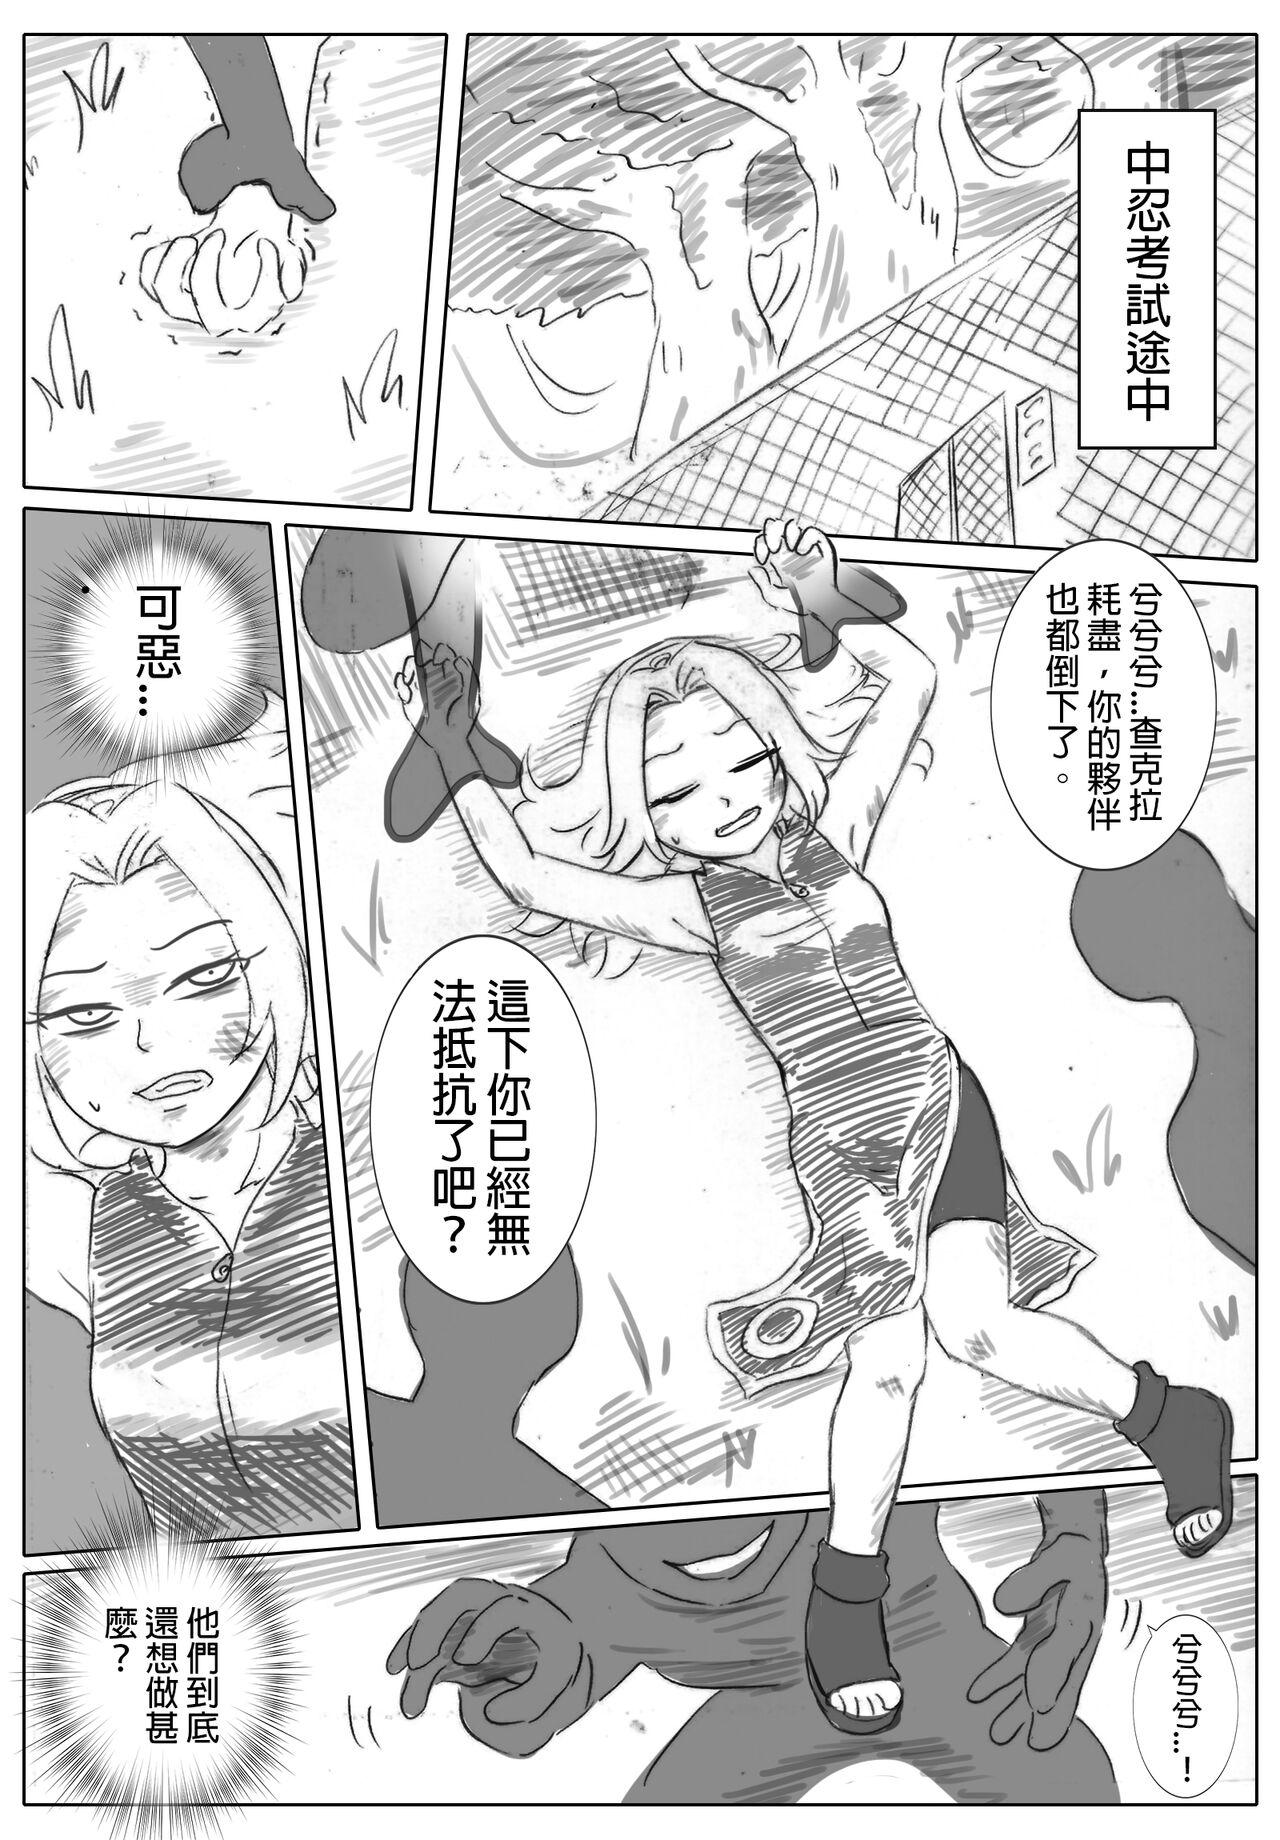 Off 琄偿腻 い 刚诀 - Naruto Butts - Page 1